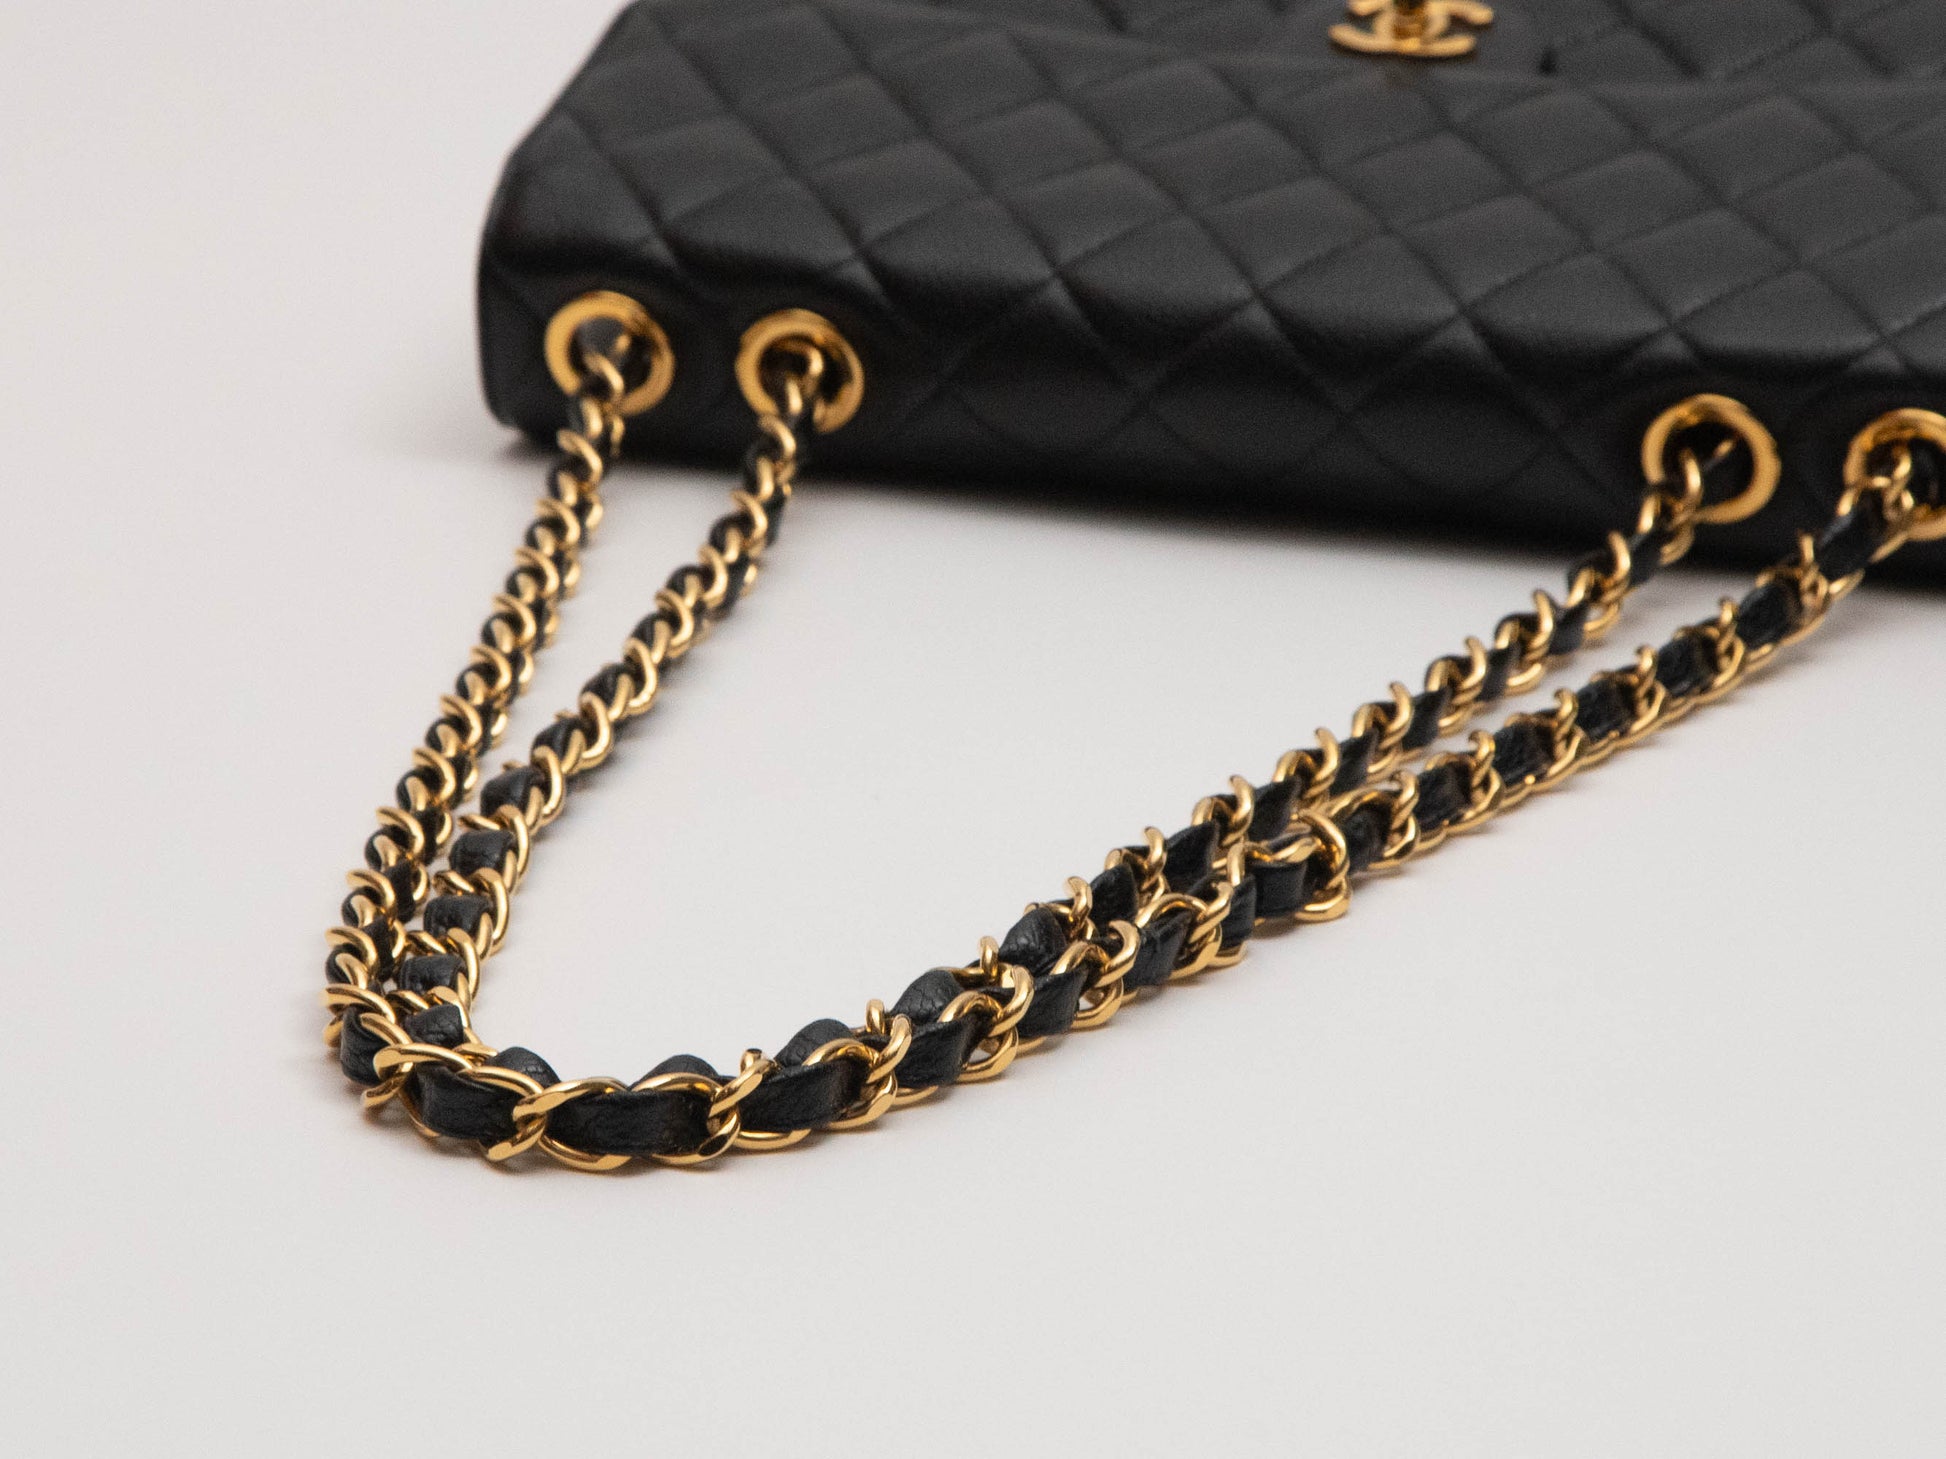 Chanel Vintage Caviar Leather Chain Pouch